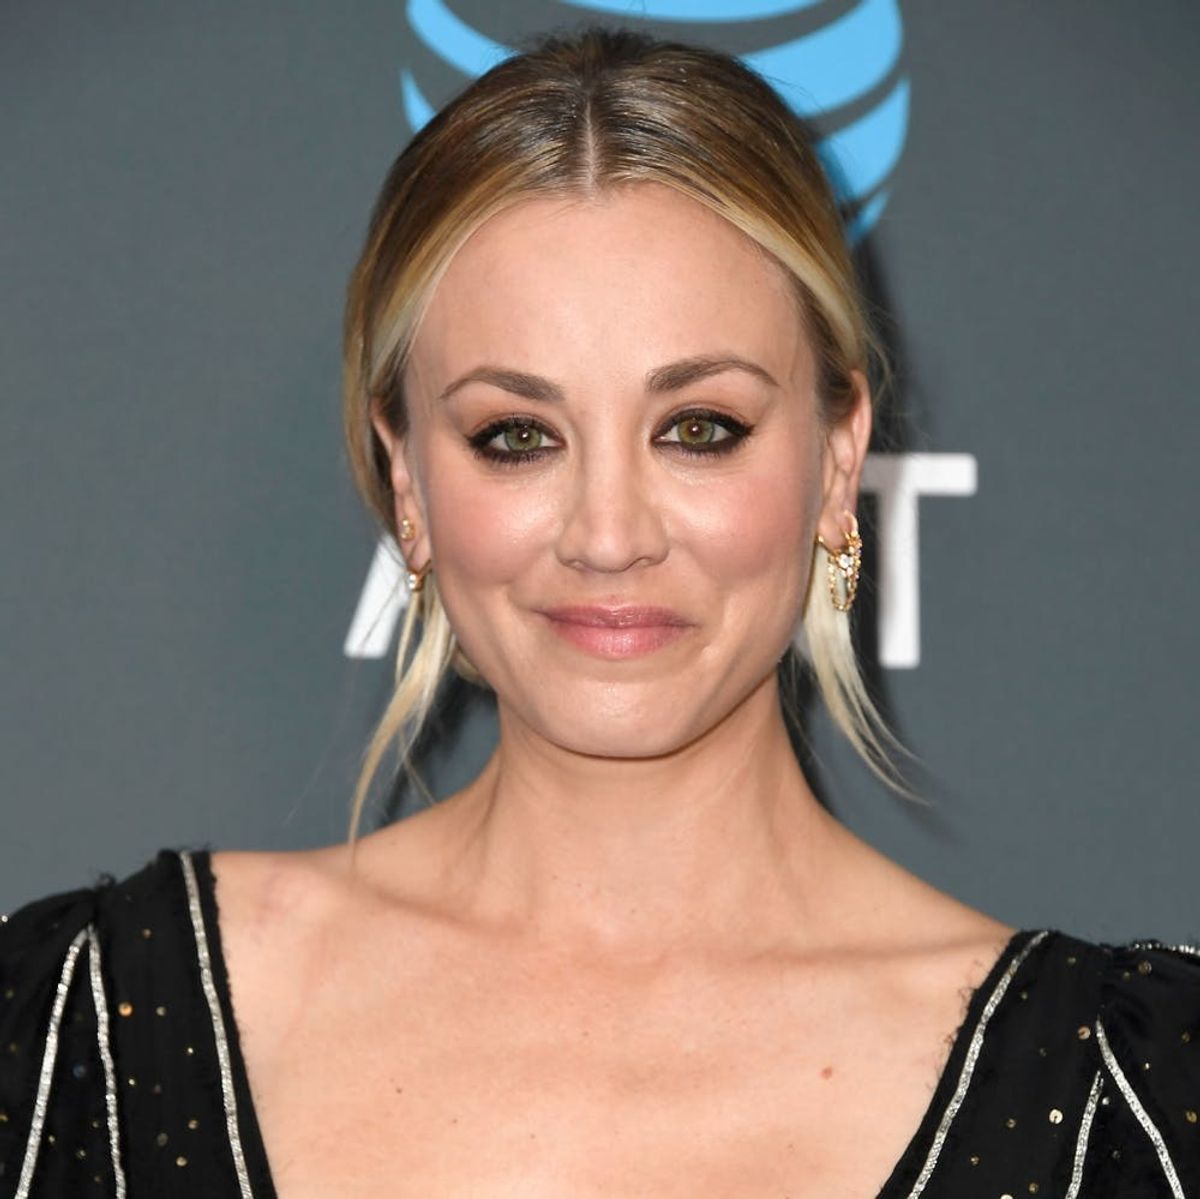 Kaley Cuoco Shares Why She Was Initially Rejected for ‘The Big Bang Theory’